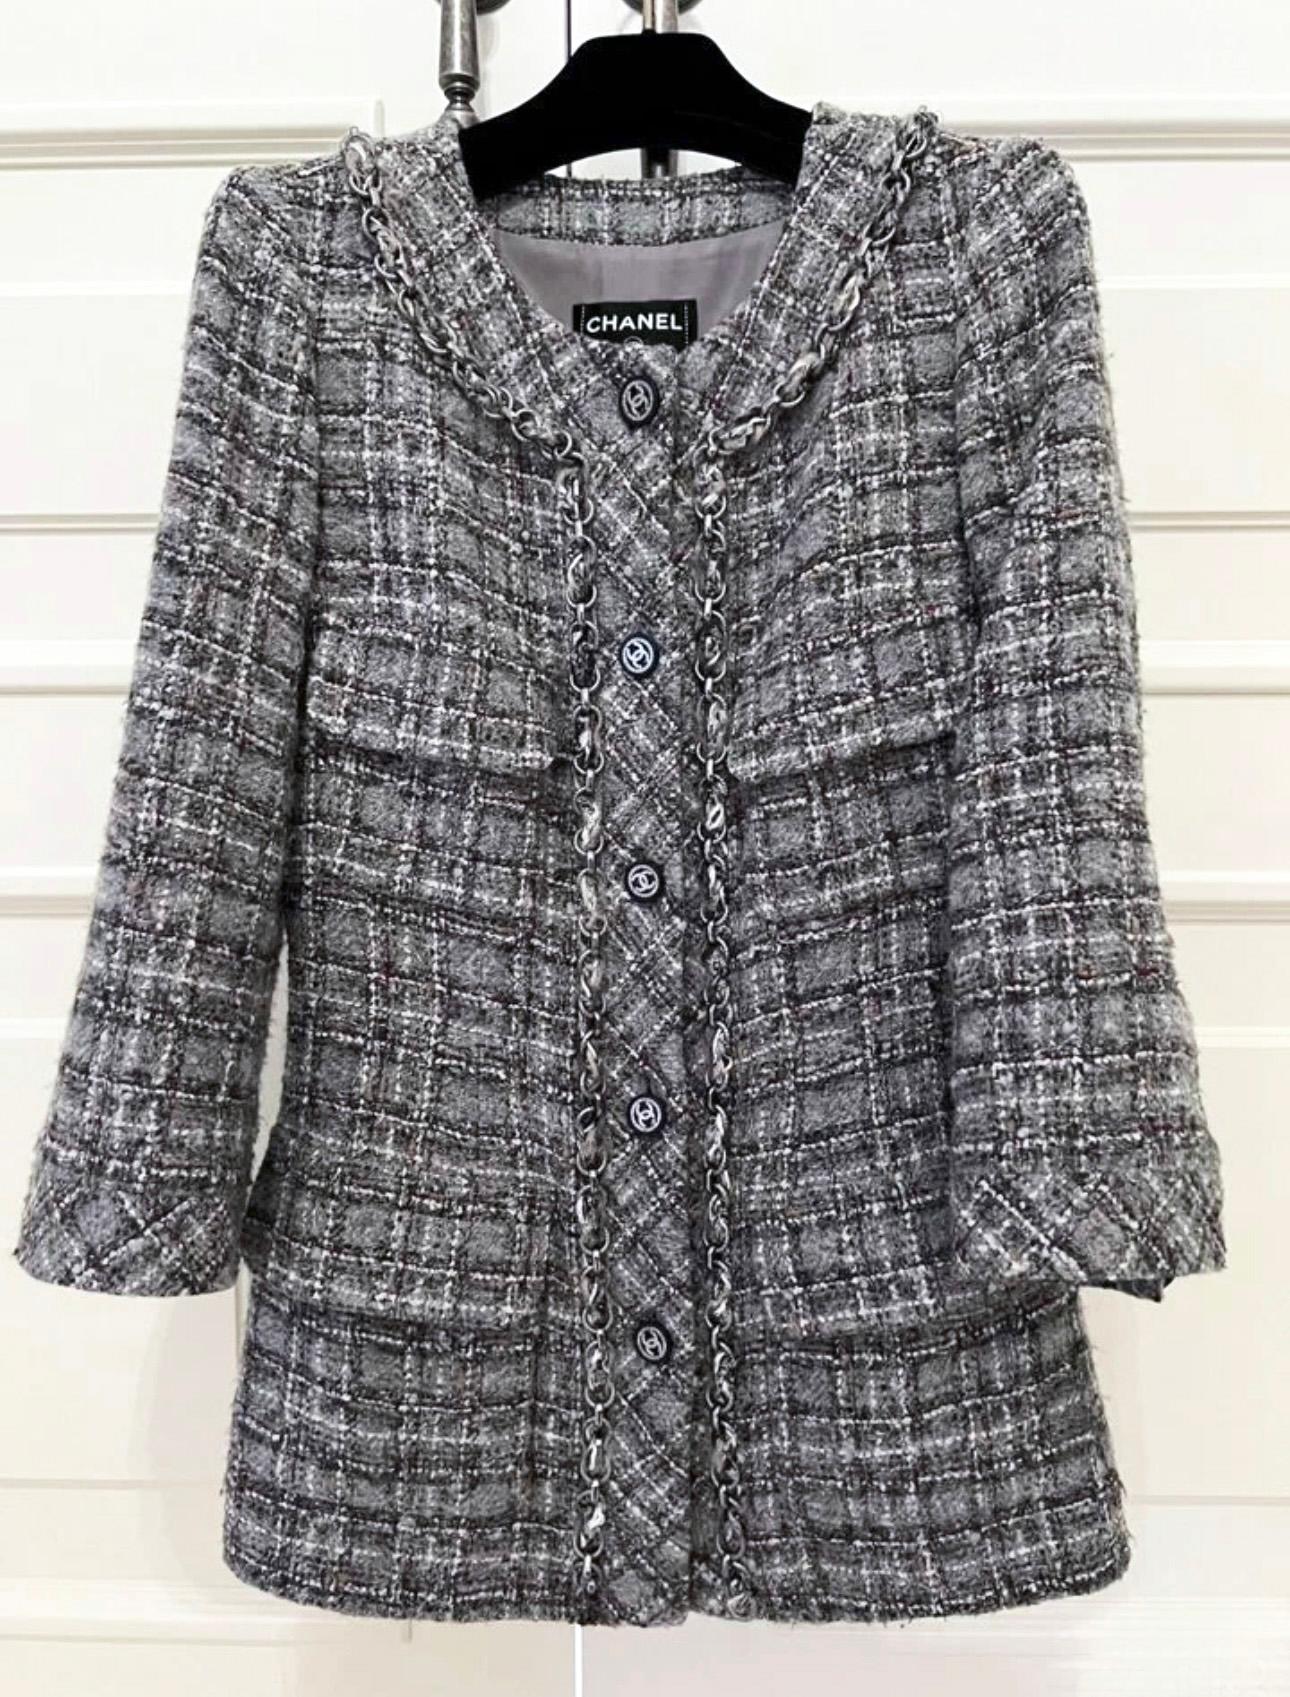 Collectible Chanel blueish grey tweed jacket with metallic chain trim throughout.
- CC logo buttons
- tonal silk lining
Size mark 38 FR. Pristine condition.